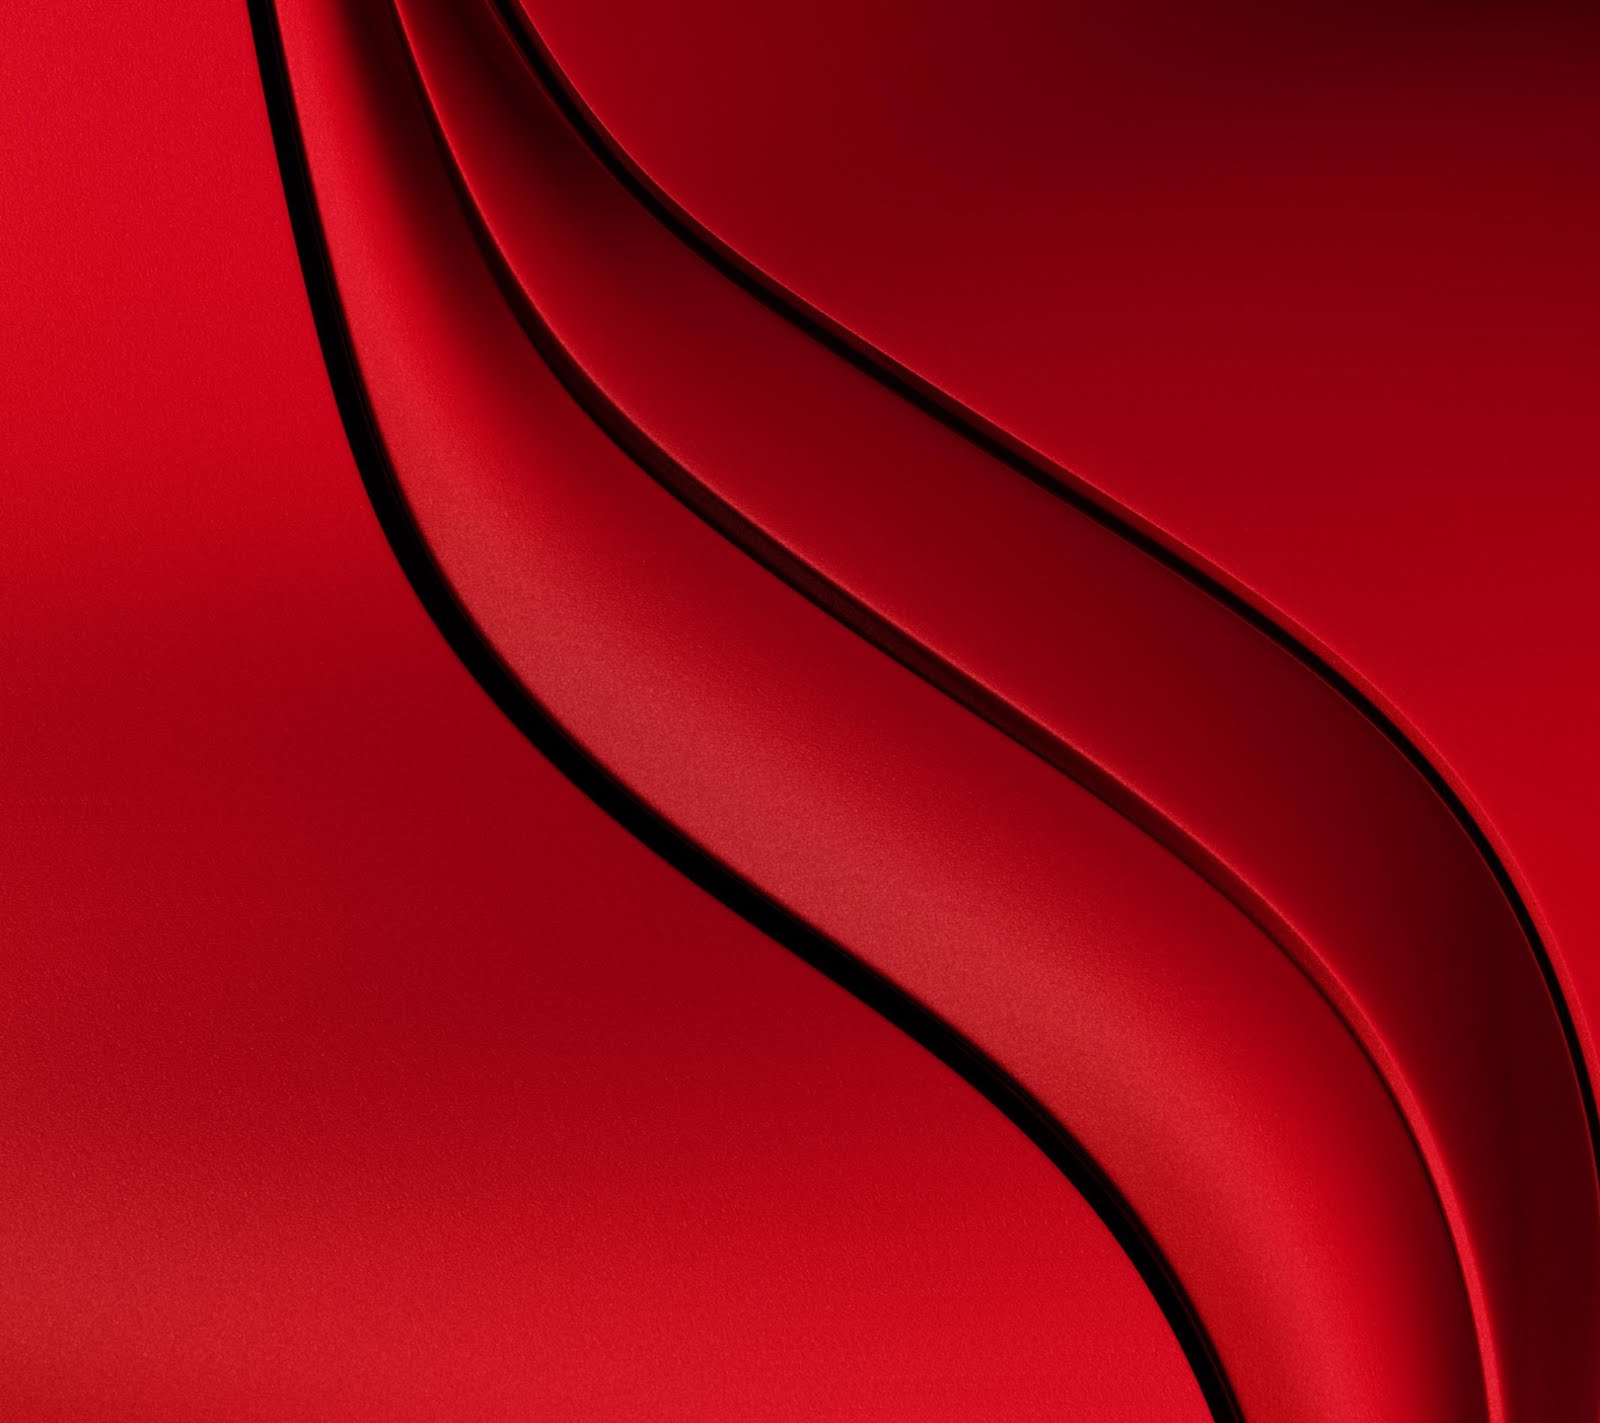 HTC J Butterfly wallpapers - xda-developers